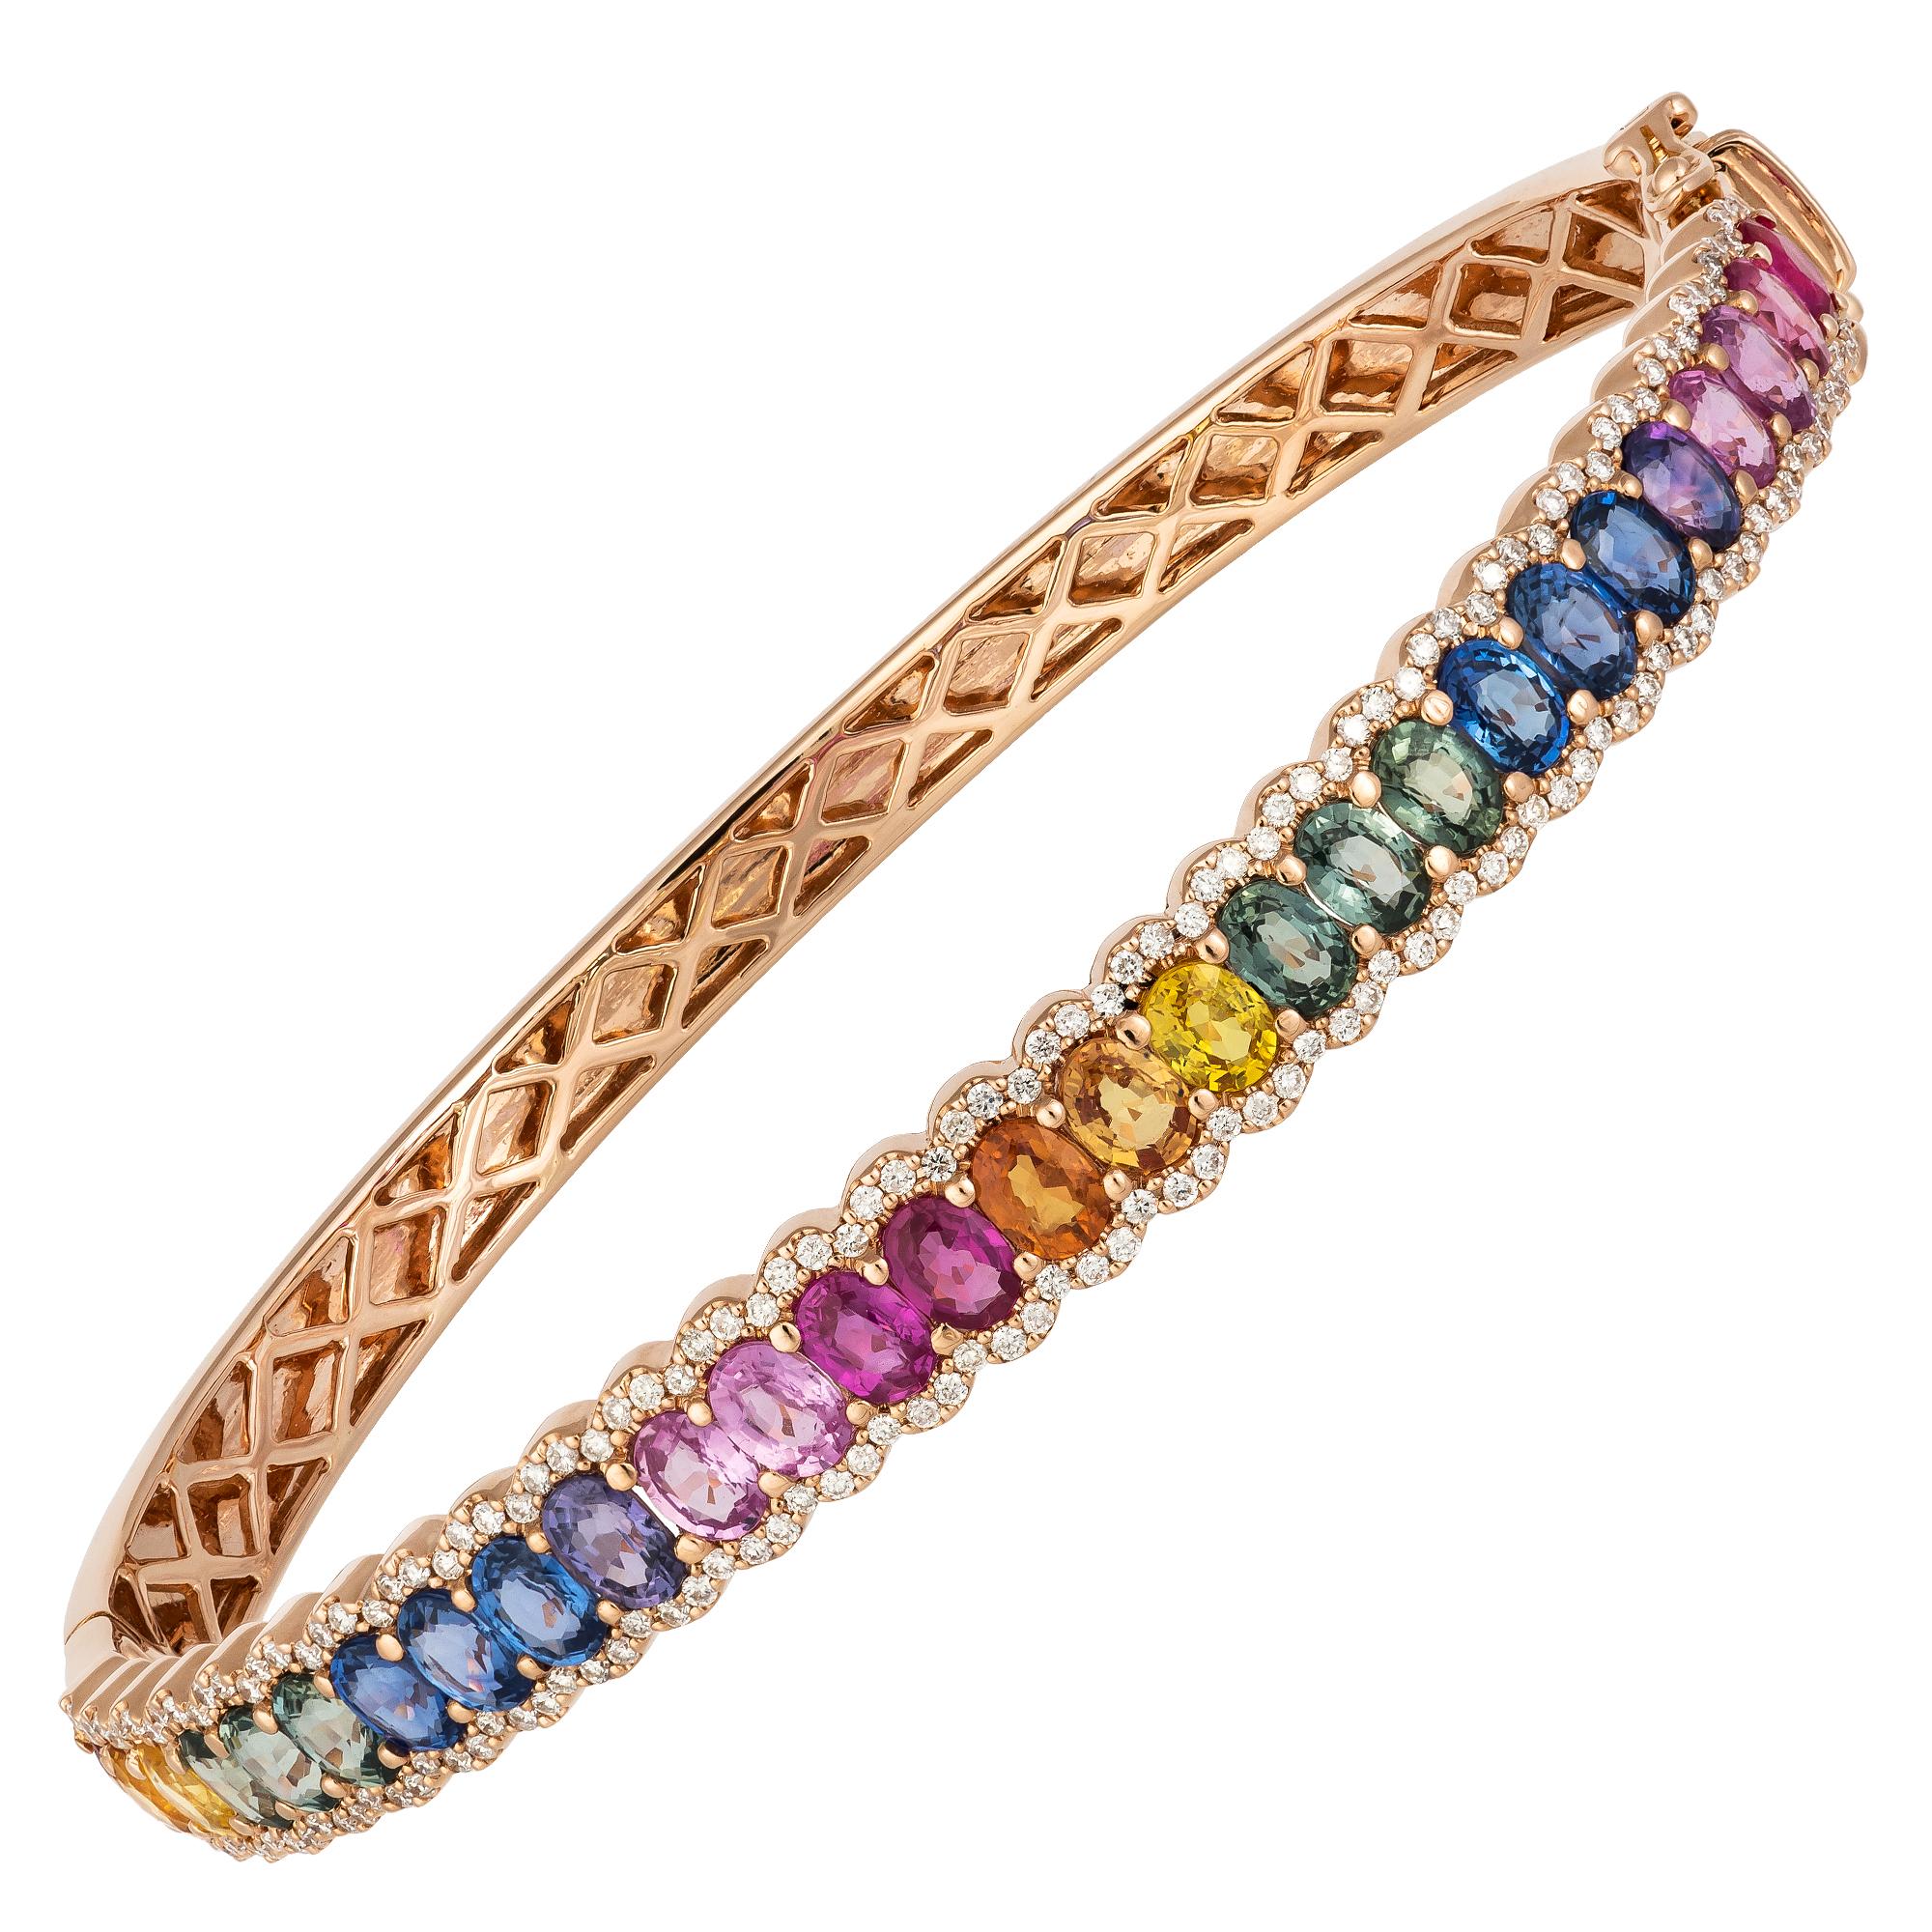 Diamond Tennis Bangle Bracelet 18K Rose Gold Diamond 0.59 Carat/176 Pieces Multi In New Condition For Sale In Montreux, CH